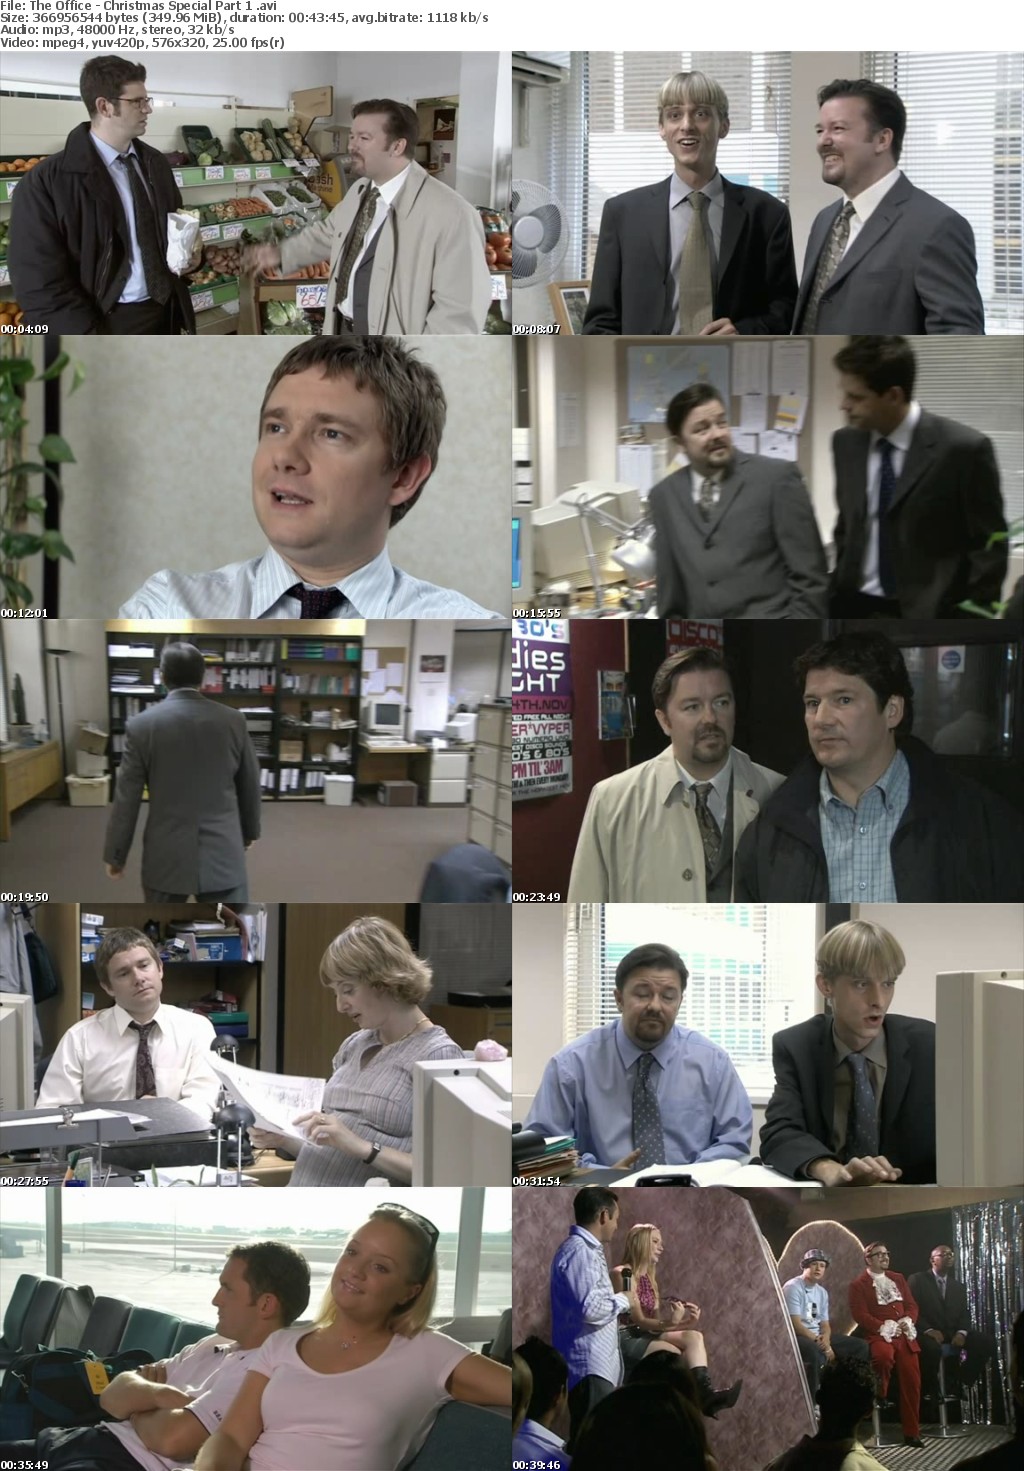 The Office Series 1 + 2 Christmas Specials And Extras (UK)